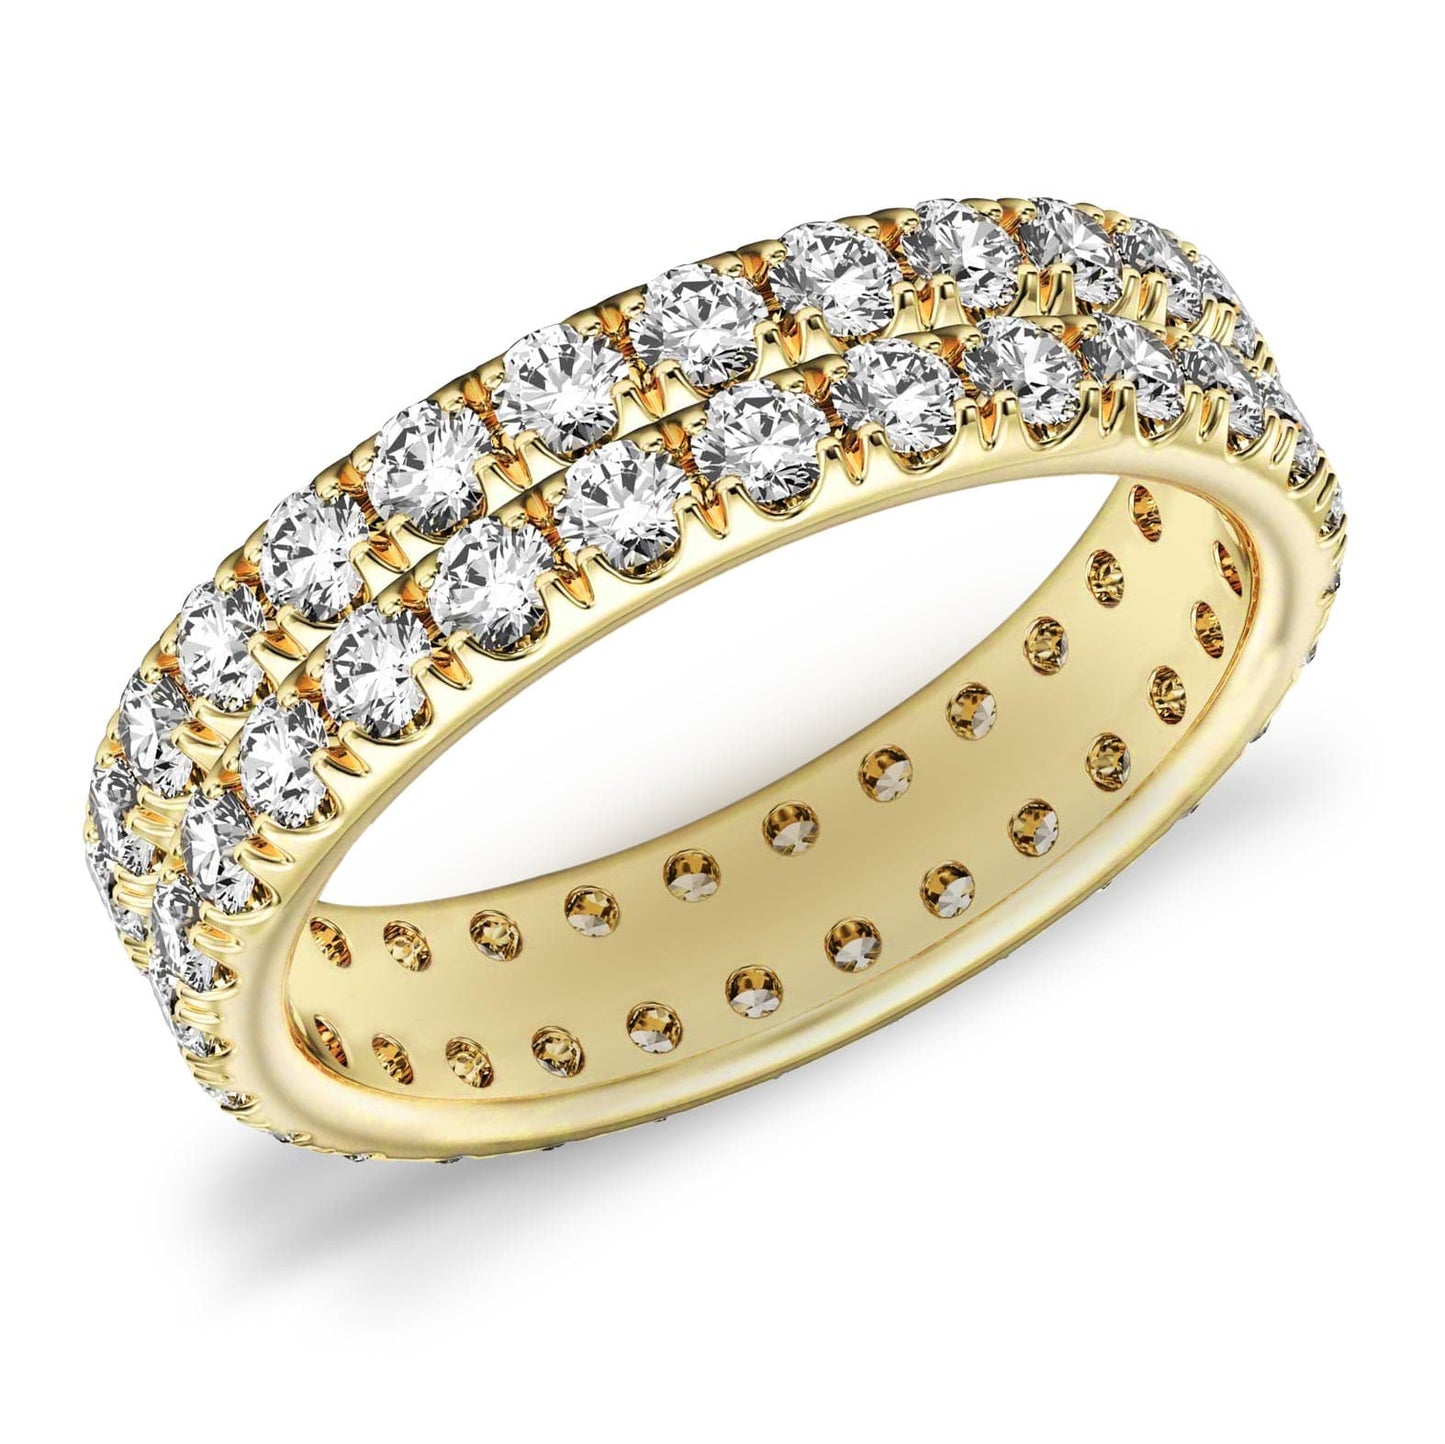 2ct French Pave Two-Row Diamond Eternity Ring in 14k Gold